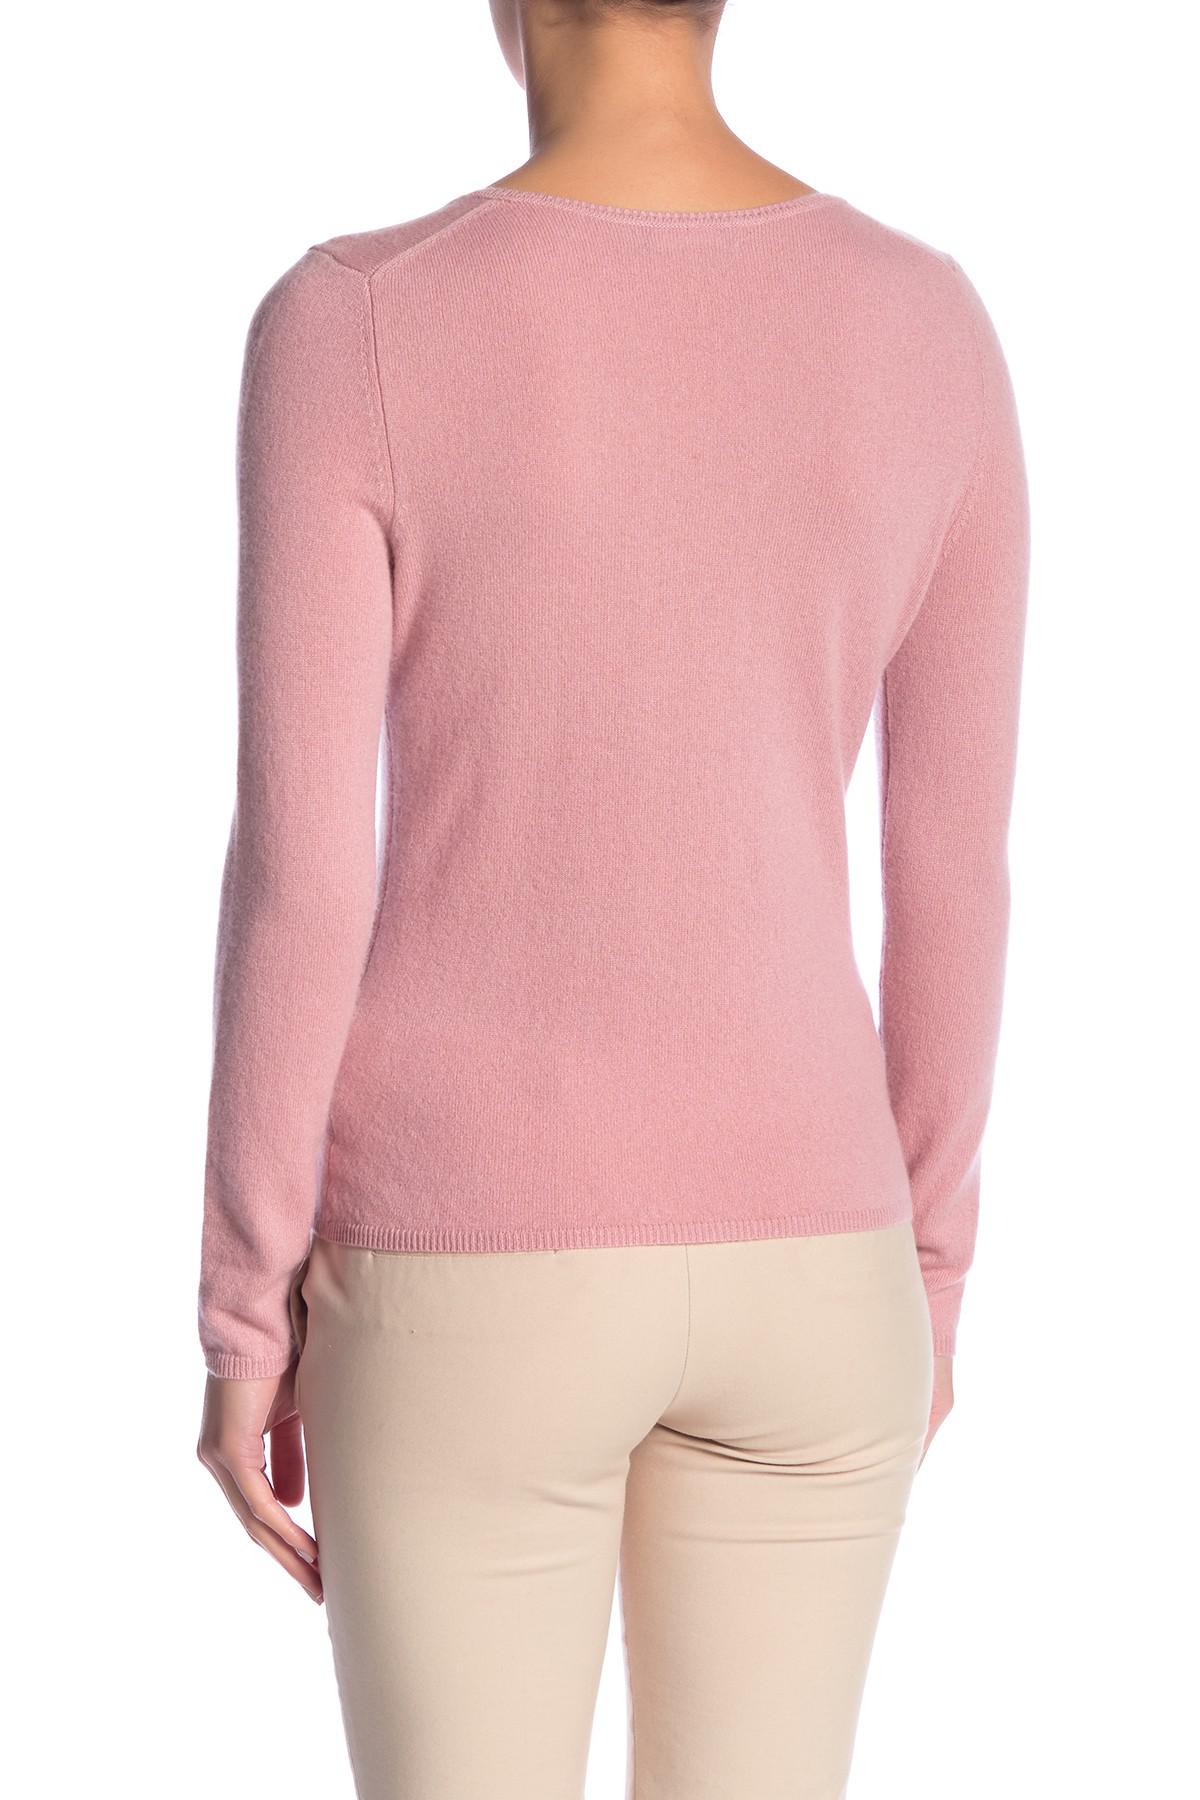 In Cashmere V-neck Long Sleeve Cashmere Sweater in Mauve (Purple) - Lyst